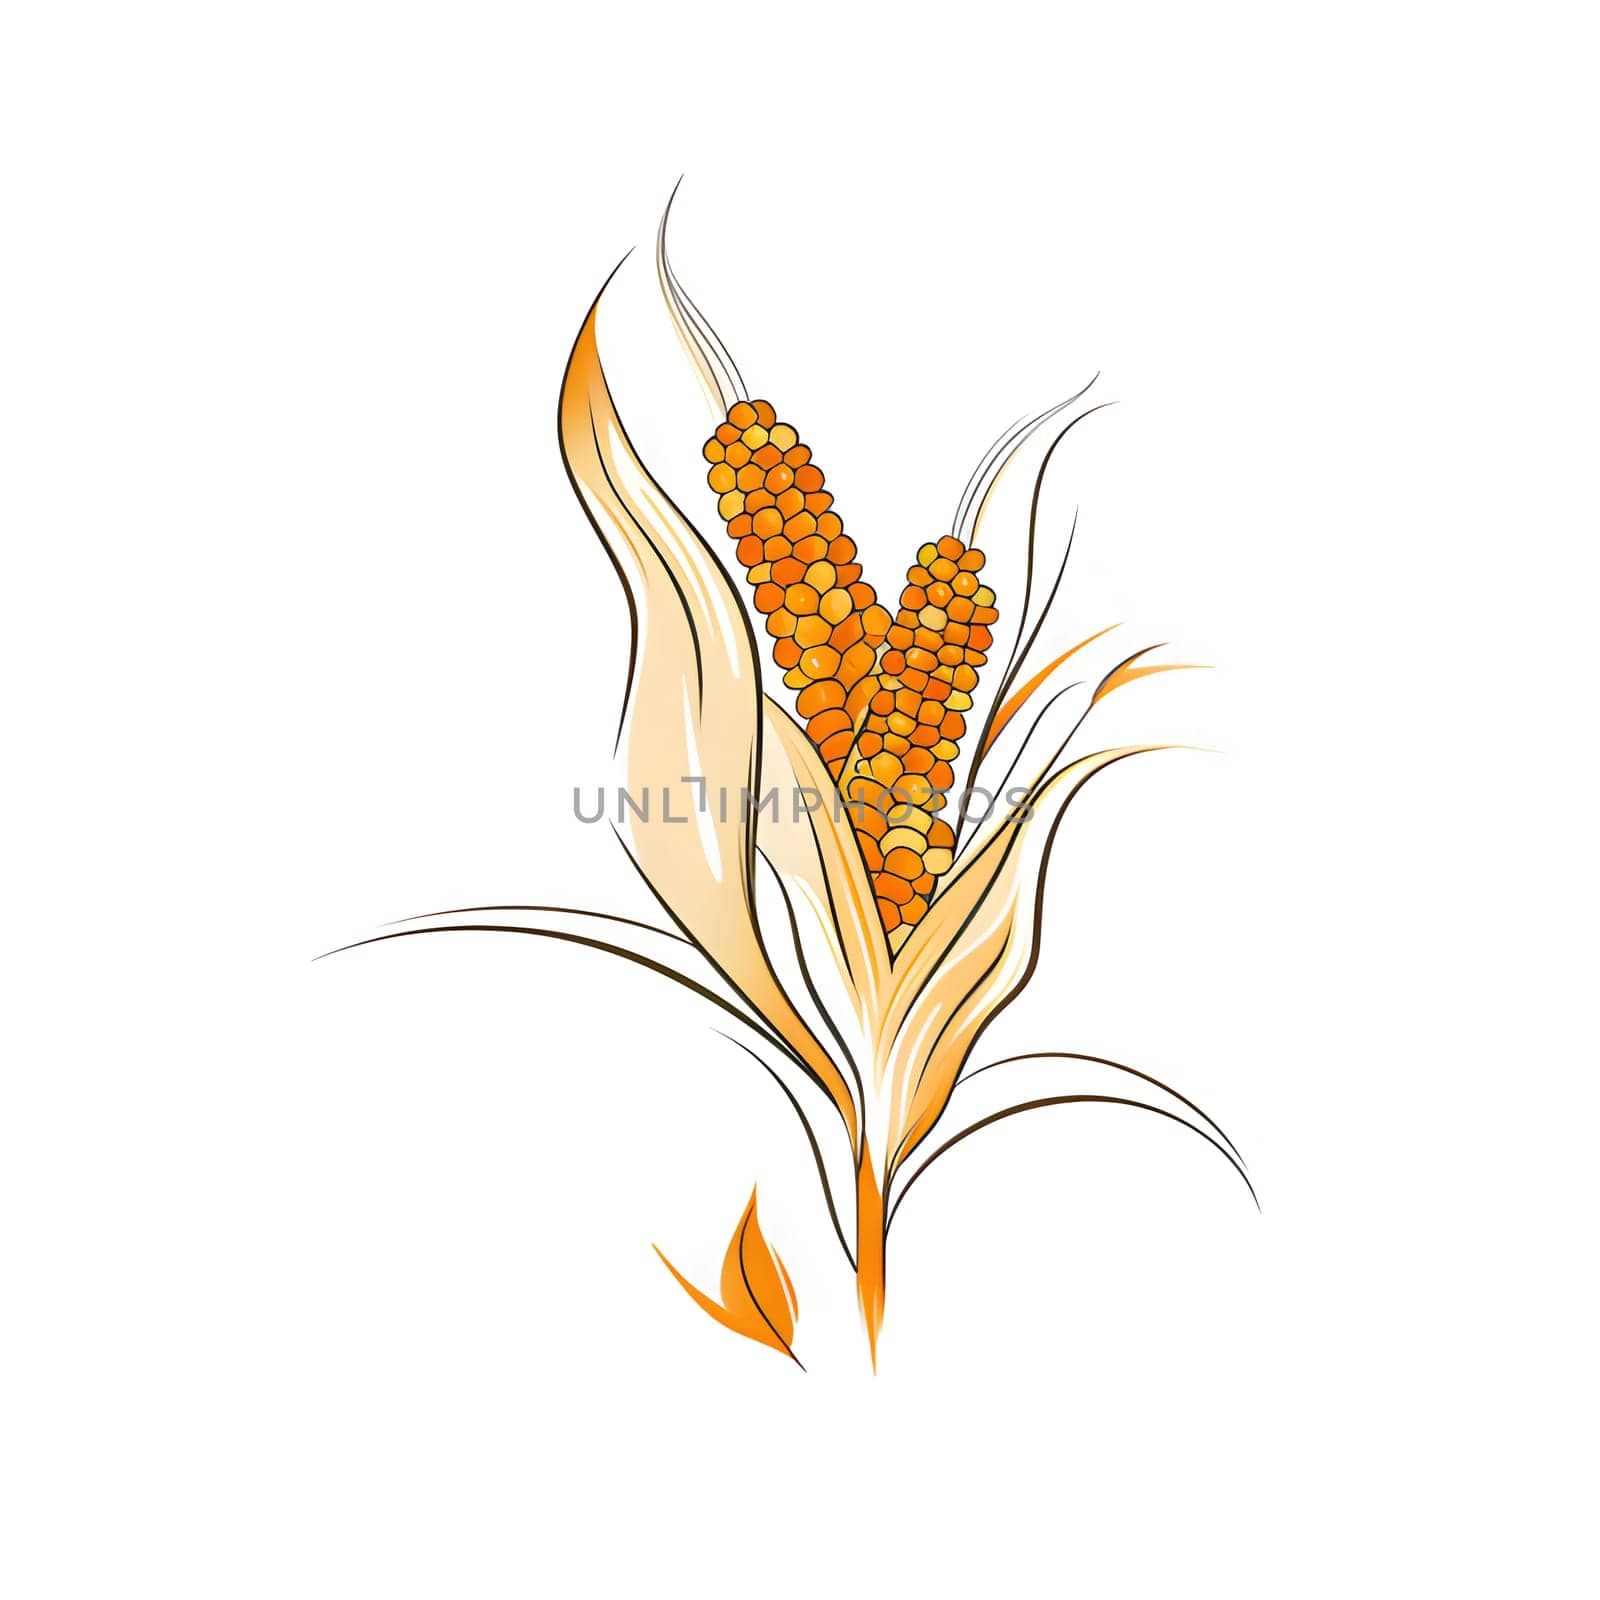 Modern logo leaves with two corn cobs isolated on white background. Corn as a dish of thanksgiving for the harvest. by ThemesS